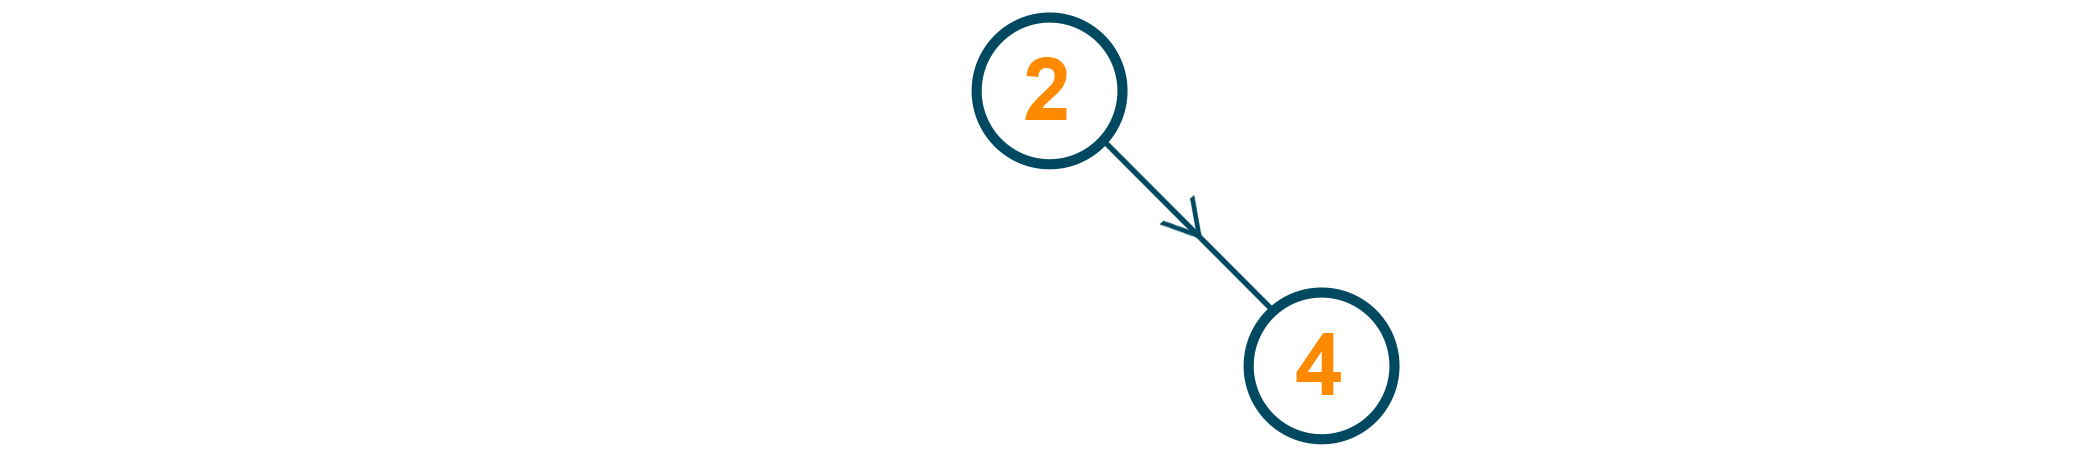 Node 4 is the second node to be inserted as the right child of node 2